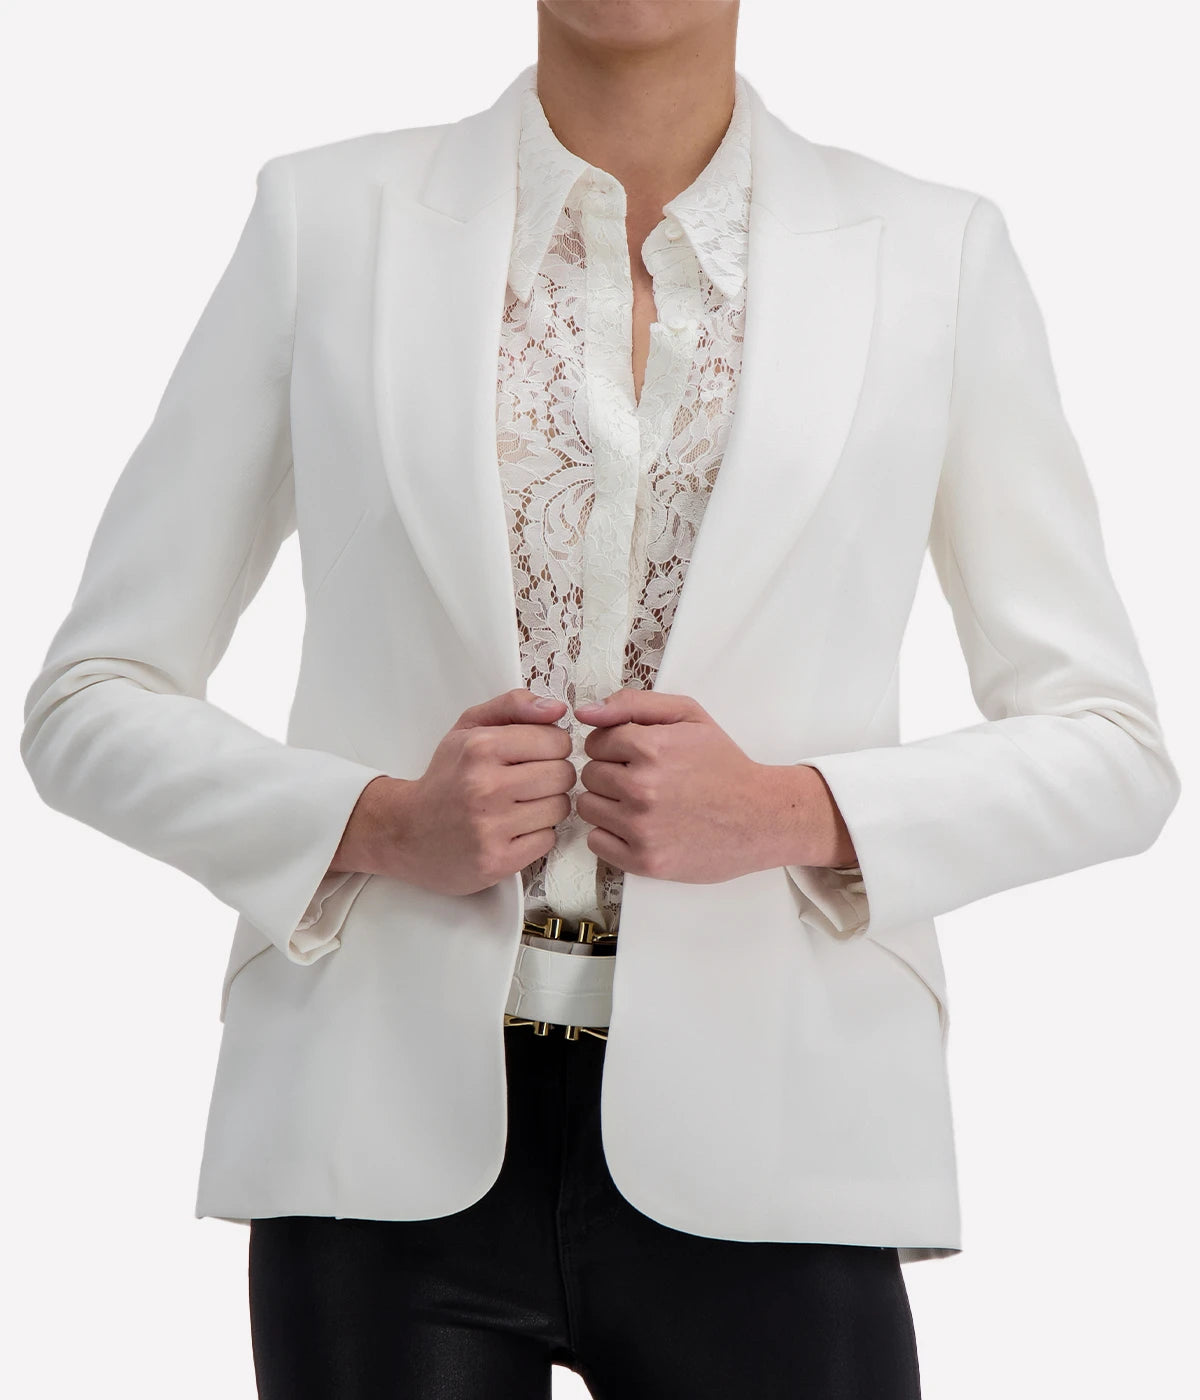 A classic single-breasted blazer in pure white, with white hardware, sleek tailoring, sophisticated shoulder pads and lapels. Work wear, everyday classic, trendy, fashion forward, transition piece, Made in California. 